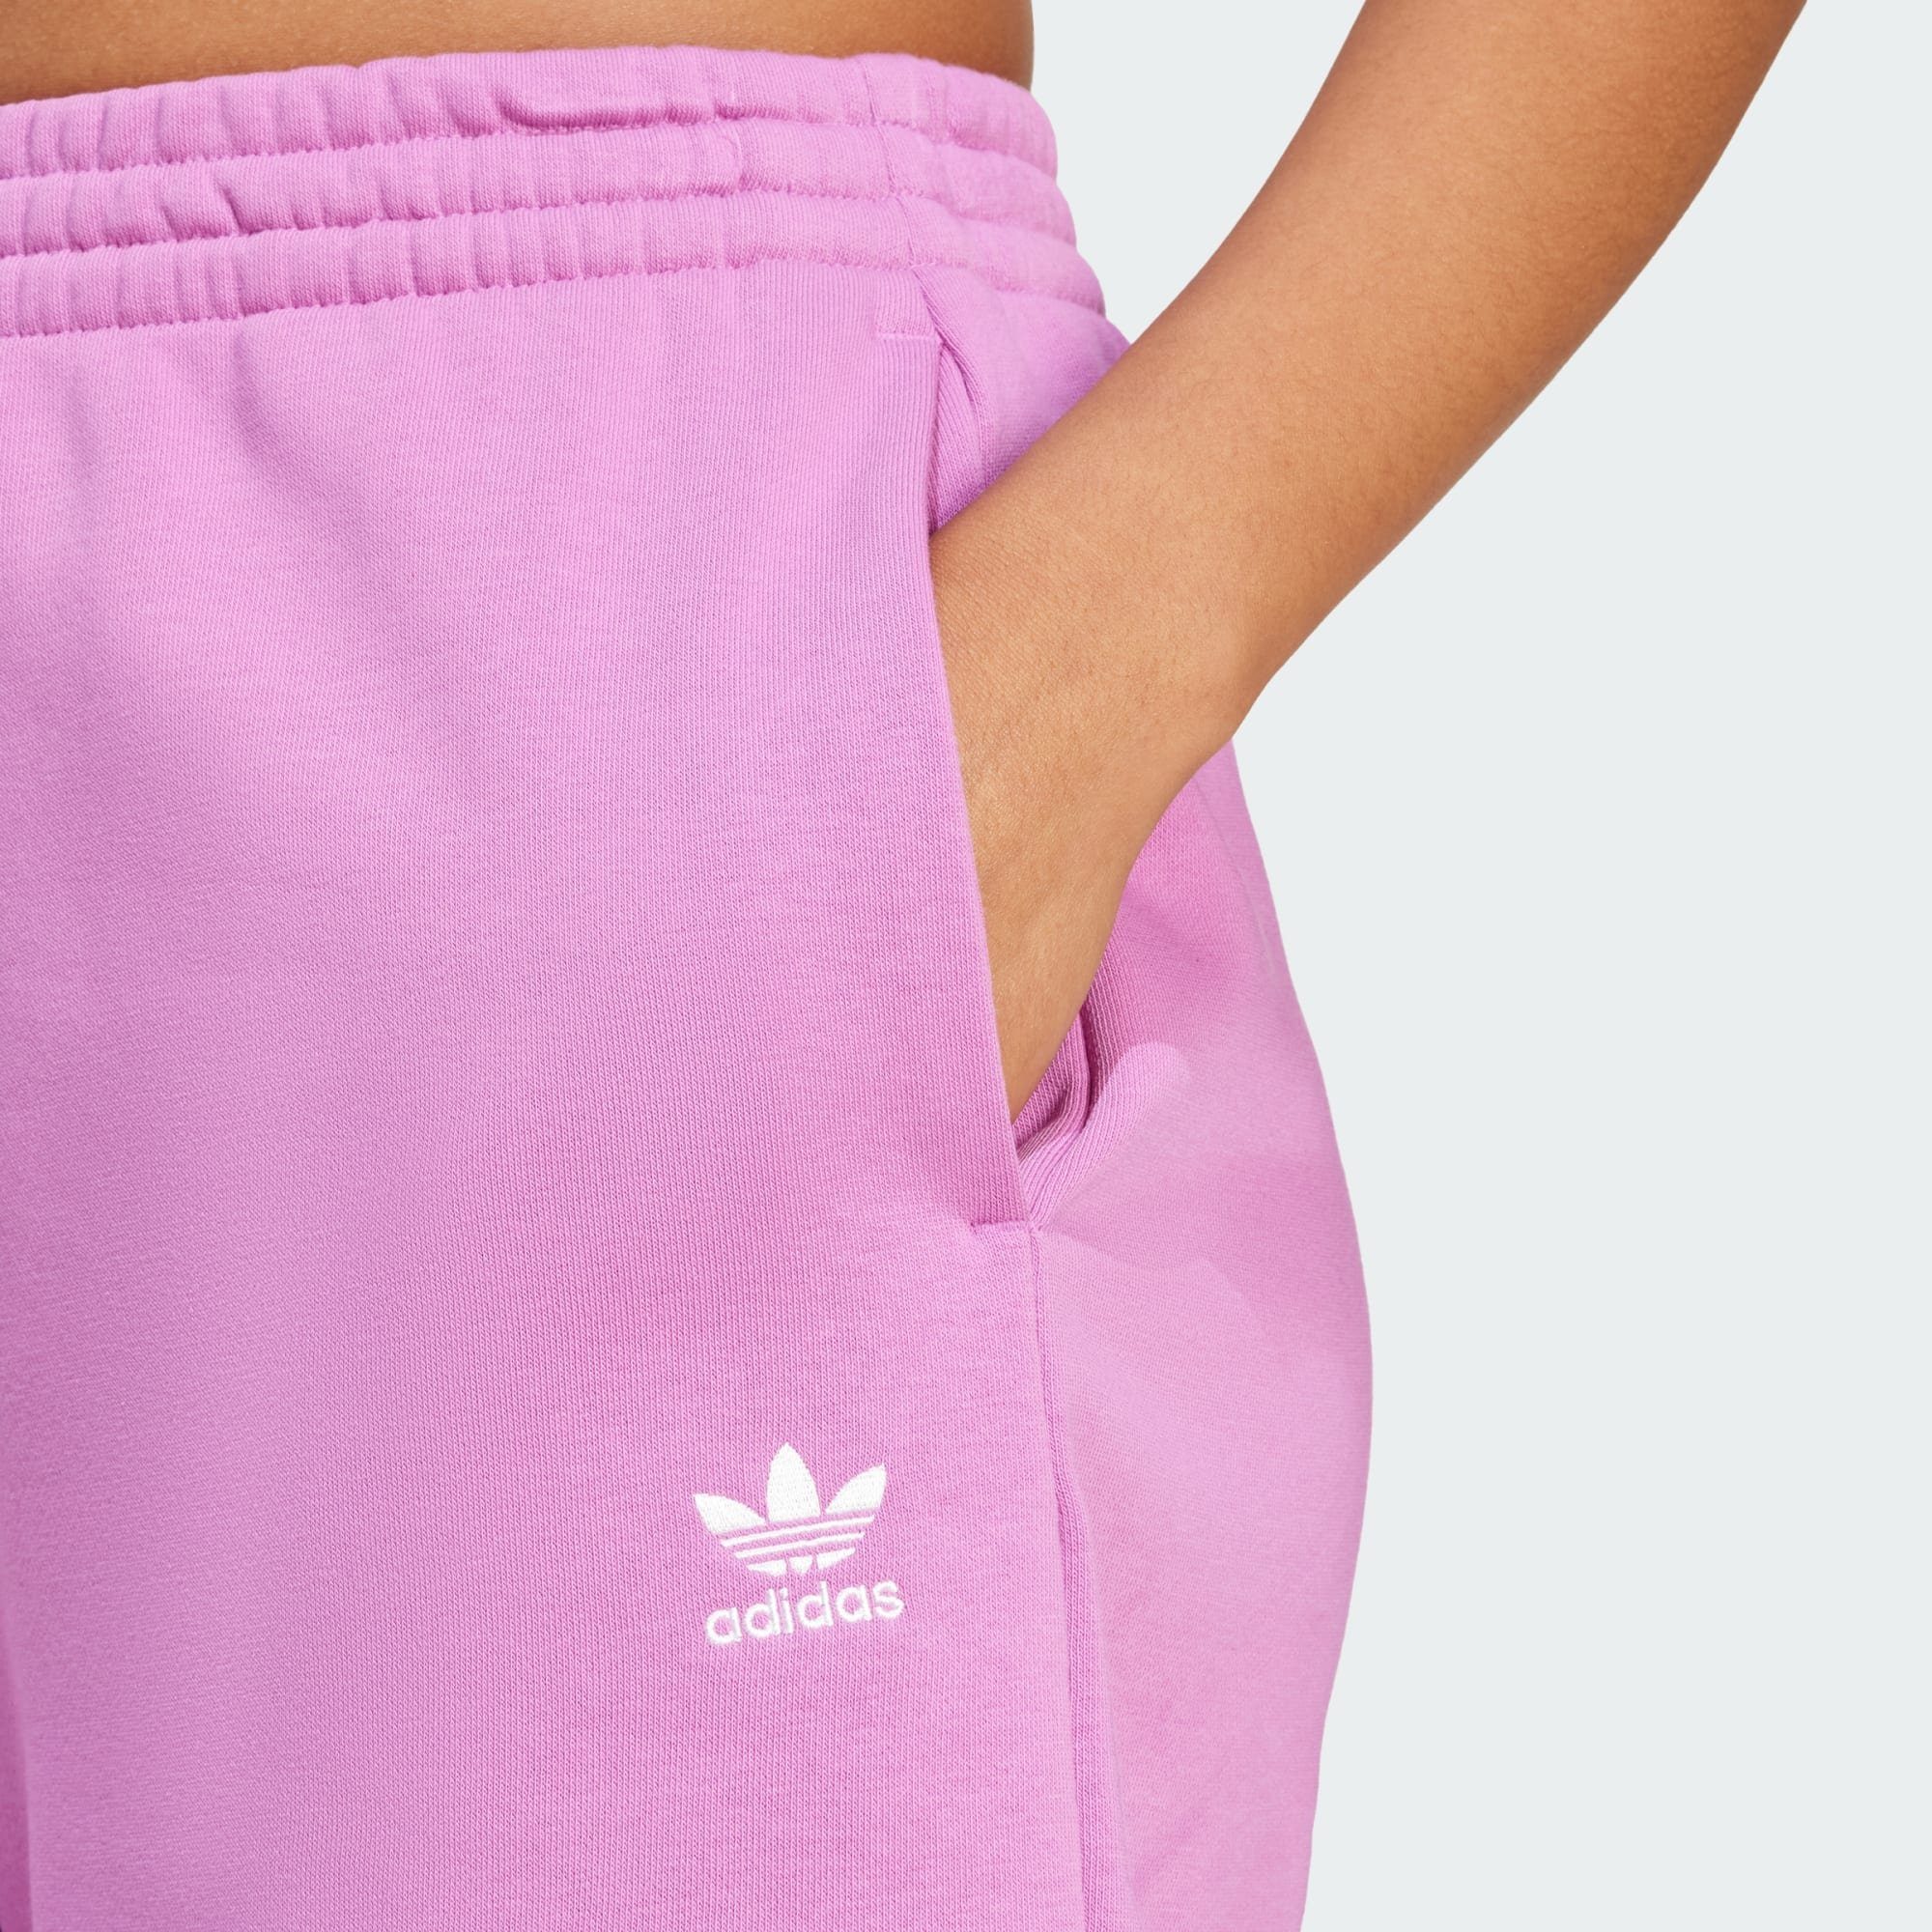 FRENCH Originals Pulse TERRY ADICOLOR Semi Lilac SHORTS ESSENTIALS adidas Funktionsshorts